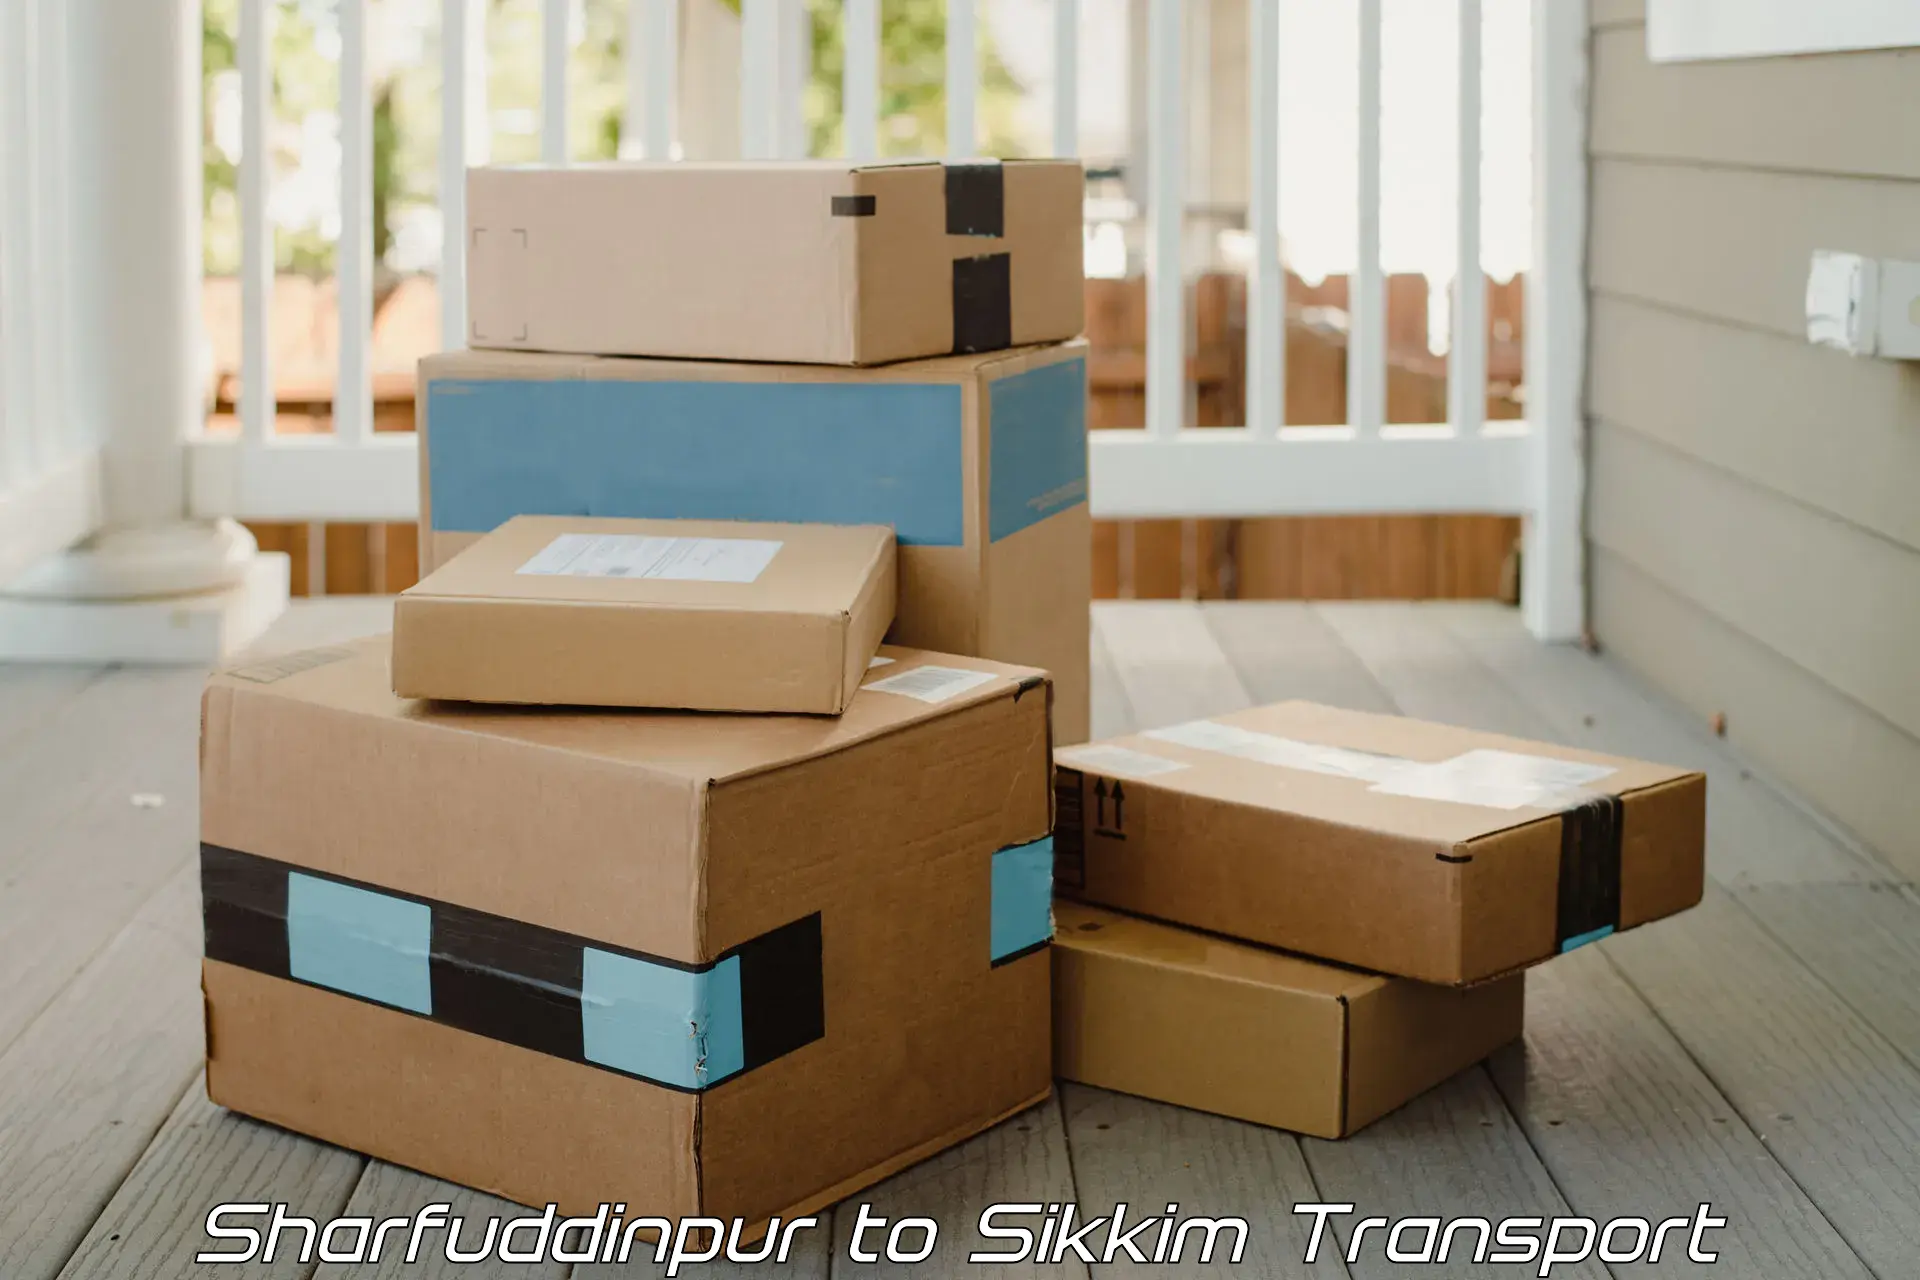 Road transport online services Sharfuddinpur to East Sikkim